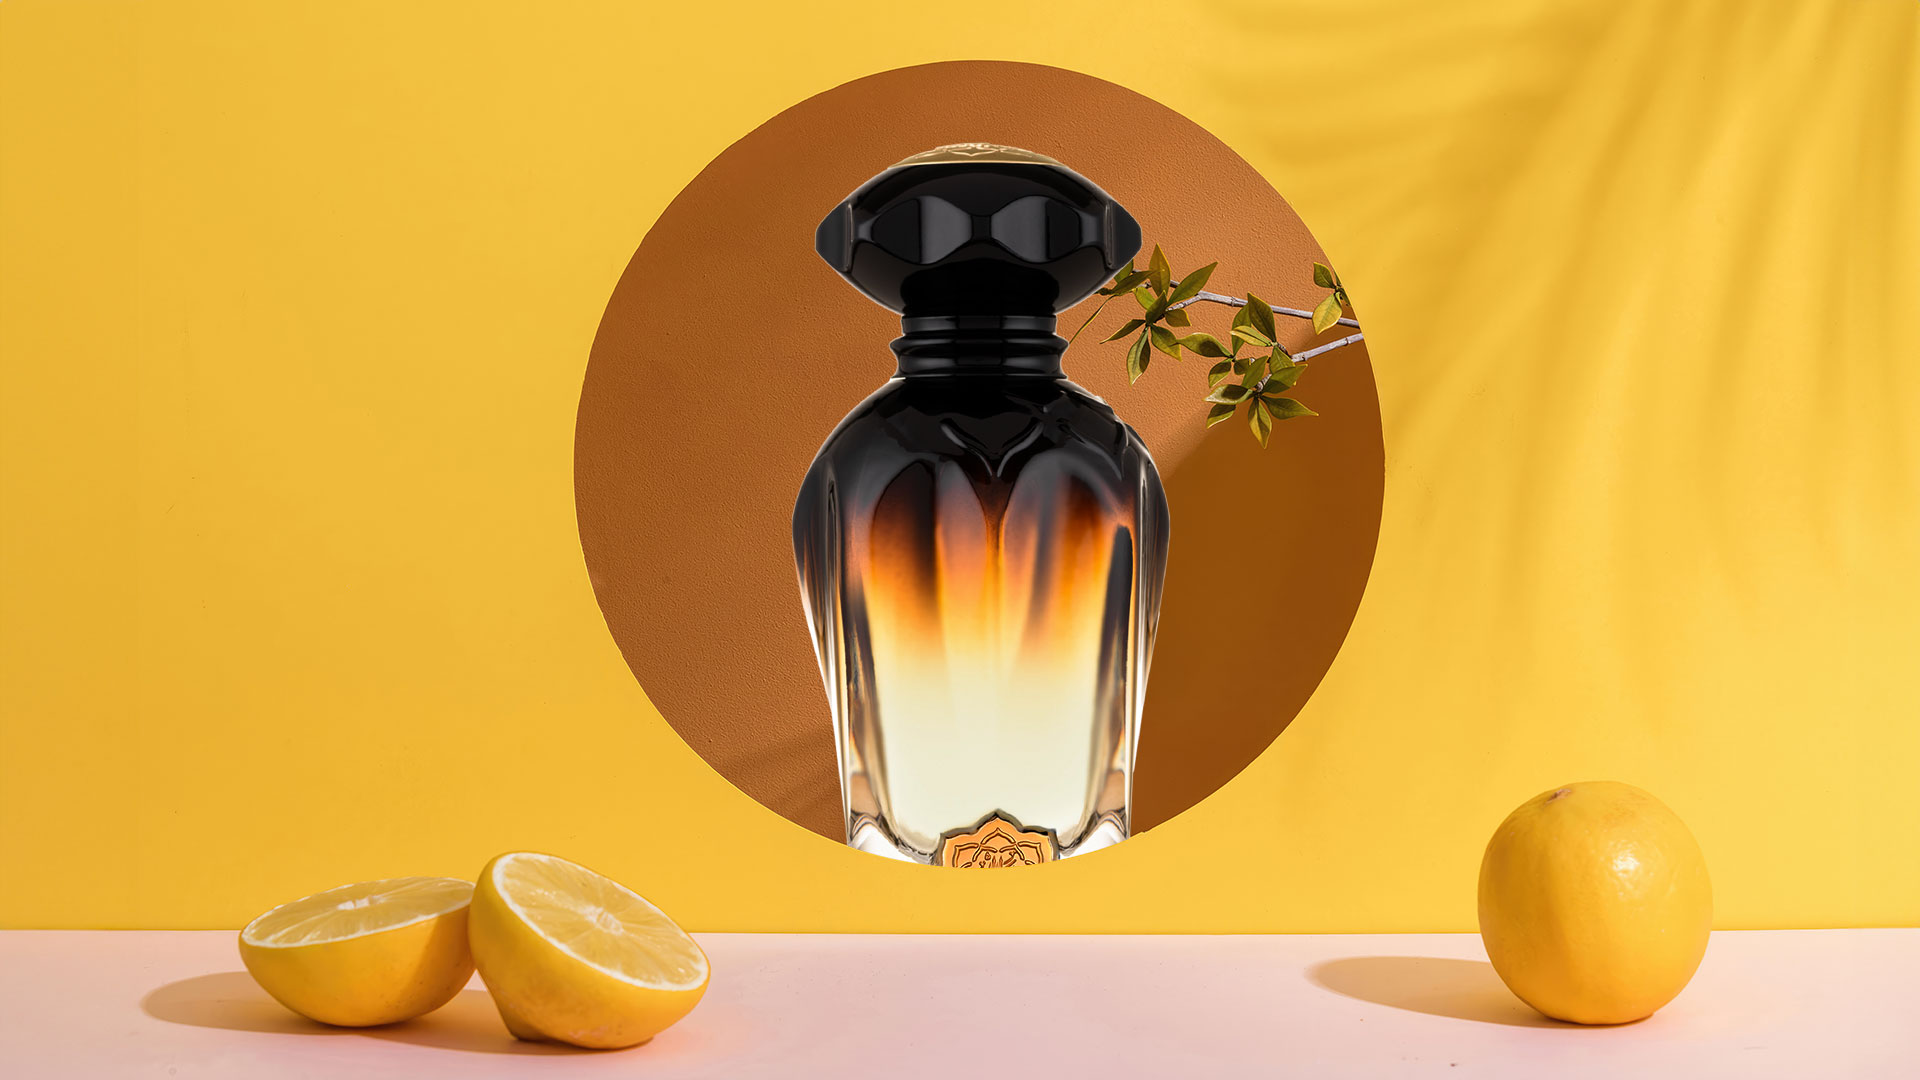 Unbeatable Deals Await: Purchase Citrus Fragrance Perfumes at Exclusive Discounts and Special Offers! ​